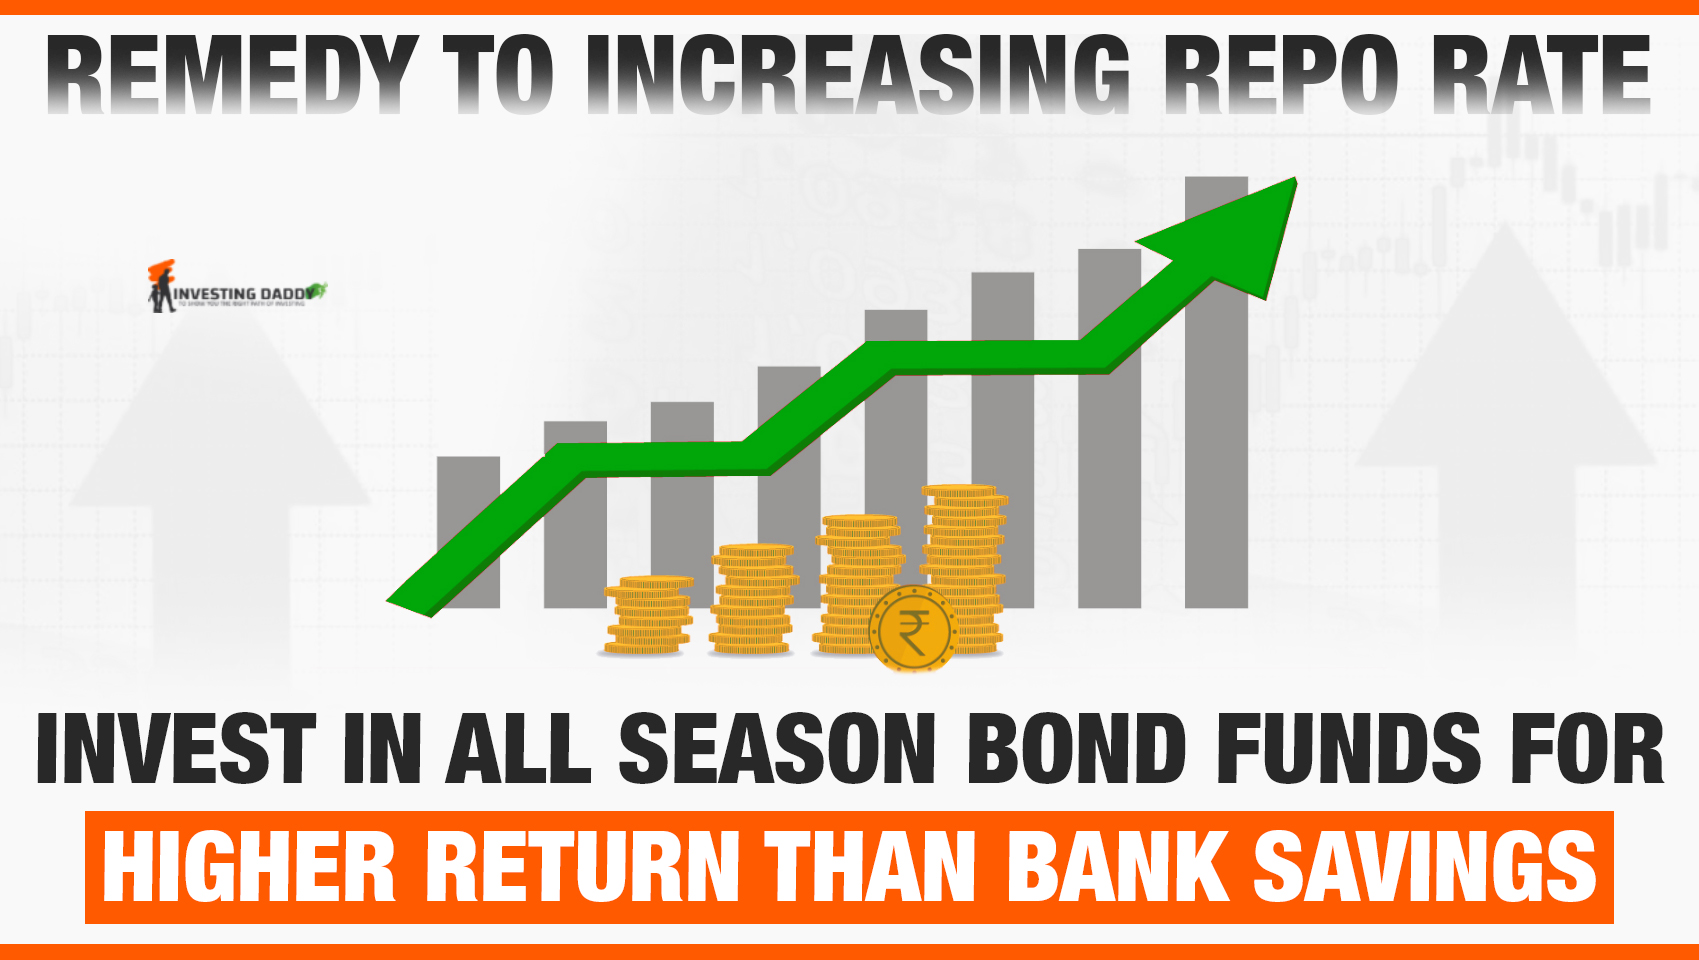 REMEDY TO INCREASING REPO RATE: INVEST IN ALL SEASON BOND FUNDS FOR HIGHER RETURN THAN BANK SAVINGS